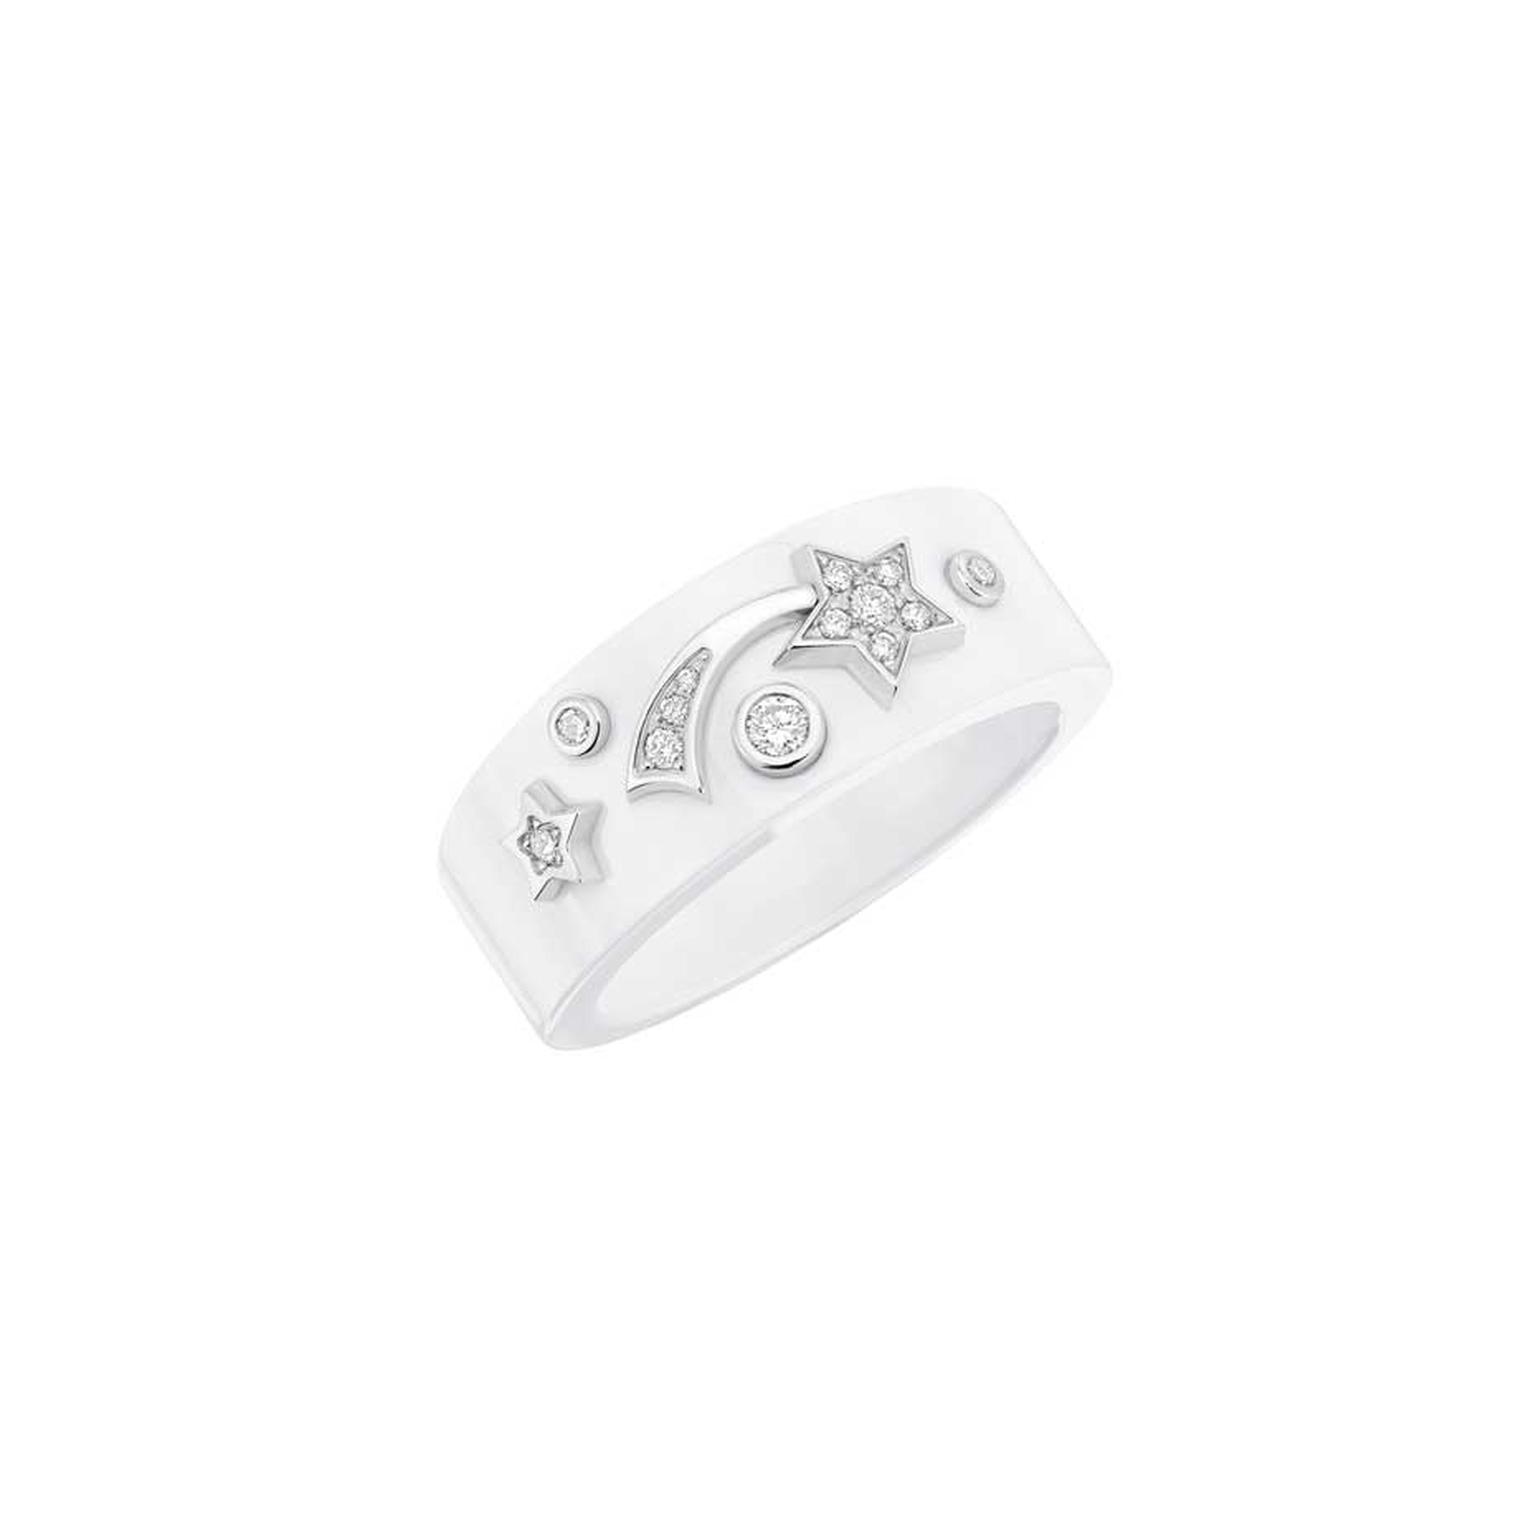 Chanel Cosmique ring in white ceramic and white gold set with brilliant-cut diamonds. All of the pieces in the Cosmique de Chanel collection are adorned with sparkling stars.